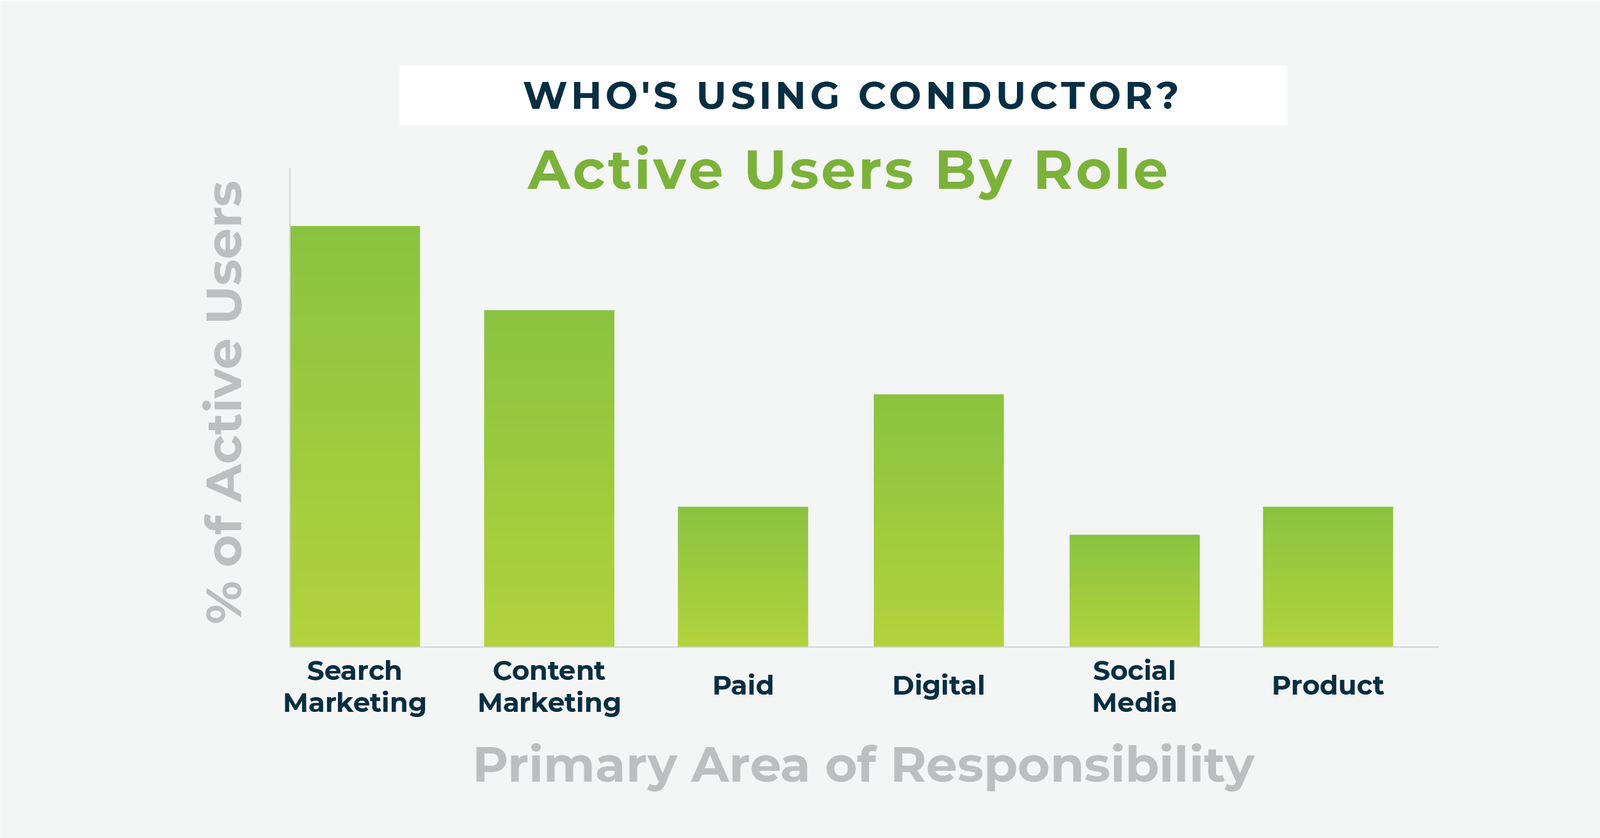 SEOs and content marketers represent the majority of users on the Conductor enterprise SEO platform.